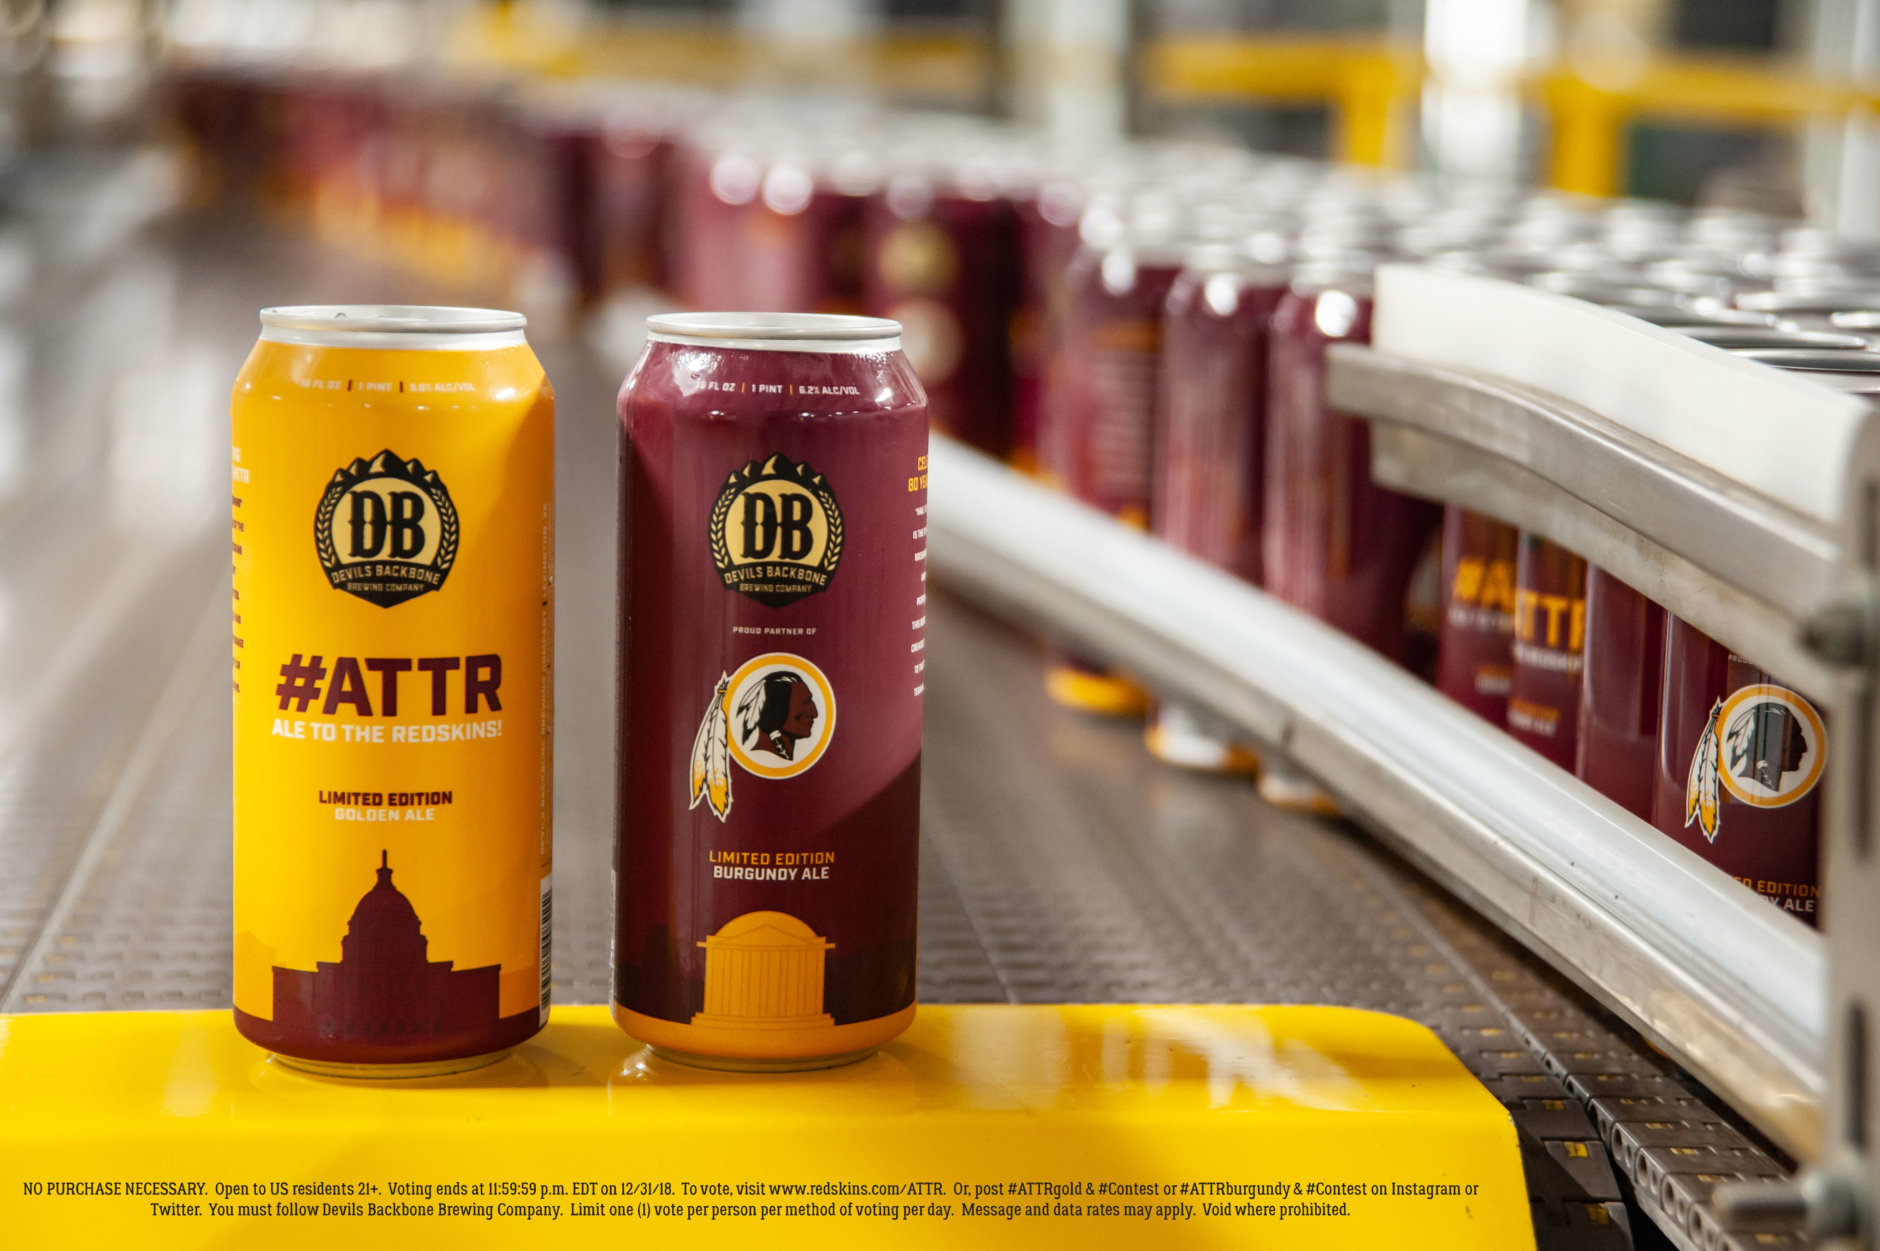 Devils Backbone has brewed up two new beers for the Washington Redskins that will be sold at FedExField this season. (Courtesy Devils Backbone)